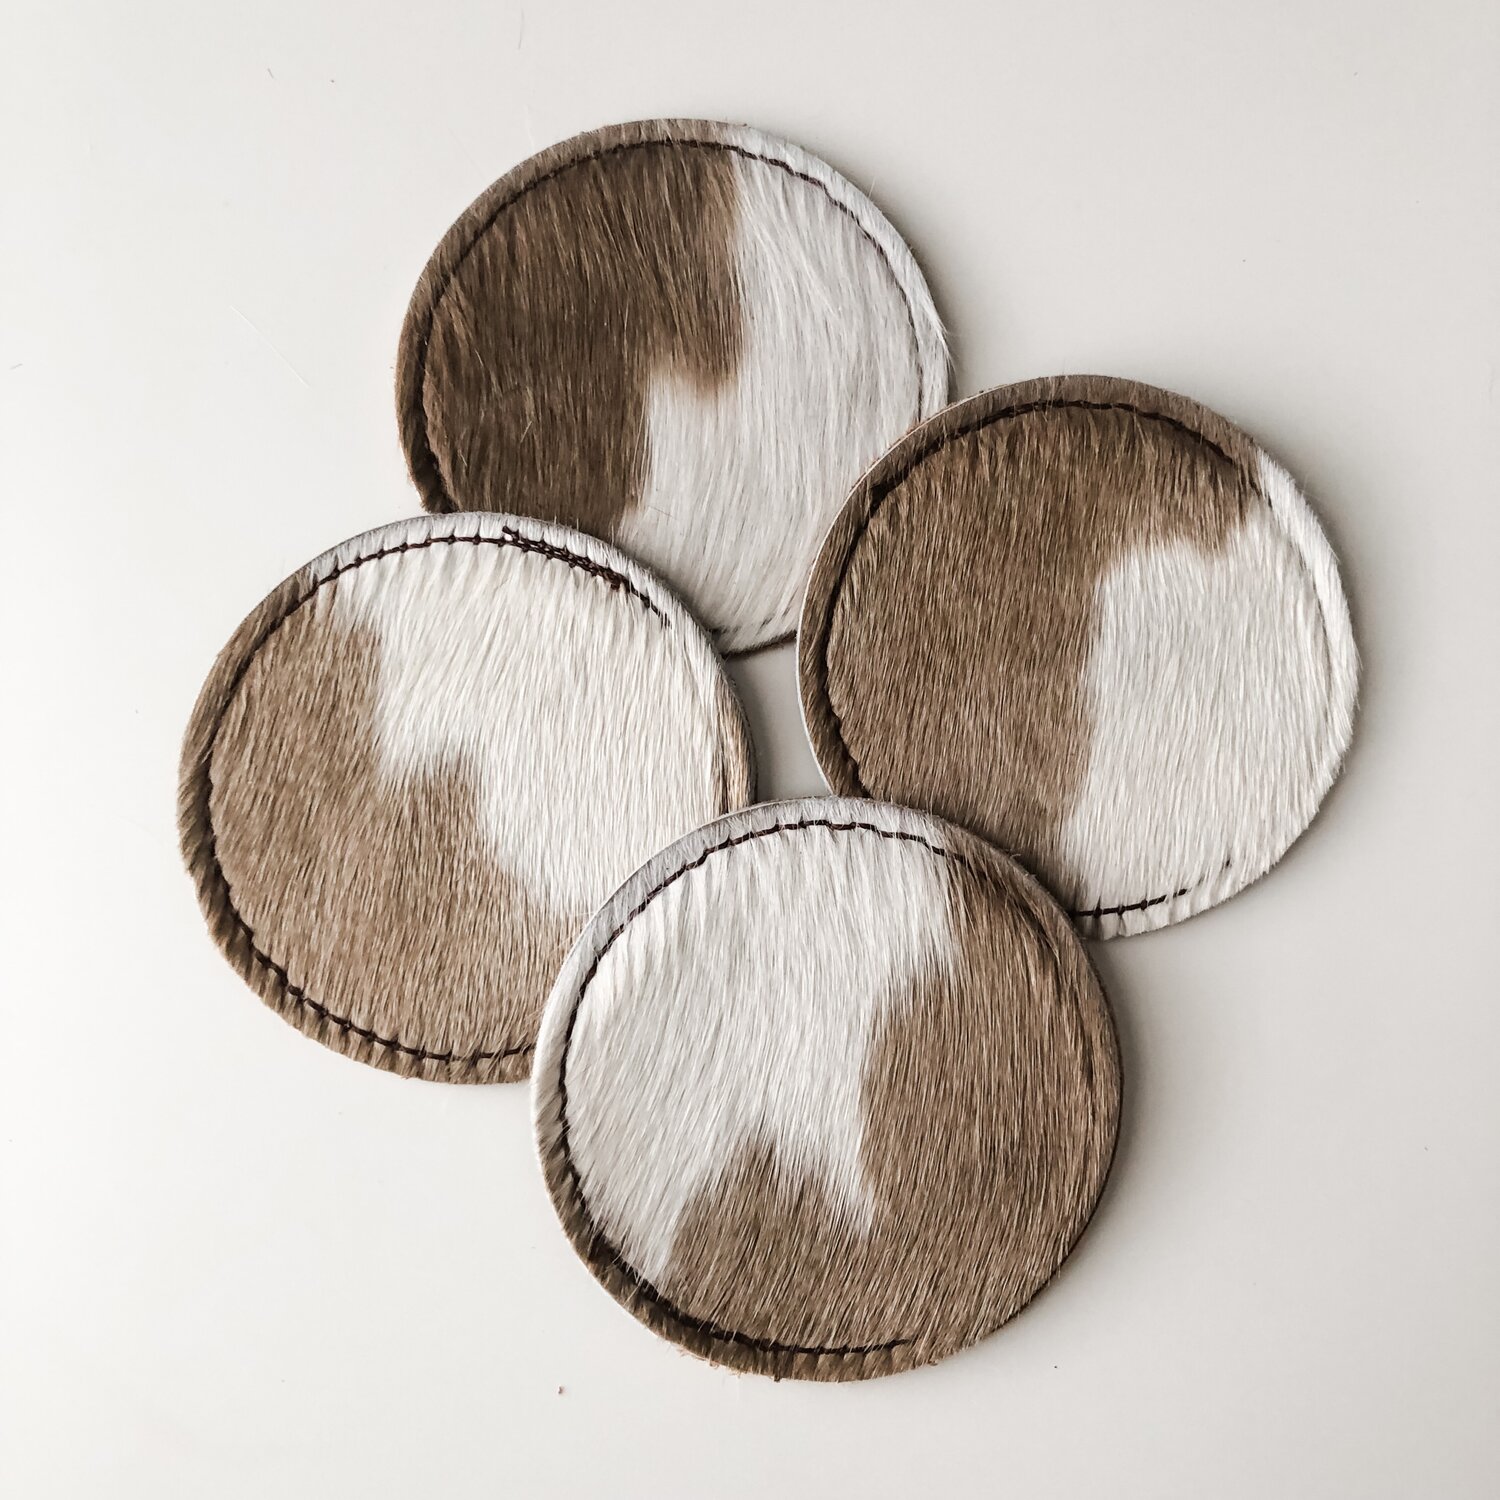 Cowhide Coasters-4pc Set – More Than Buckles Western Brand